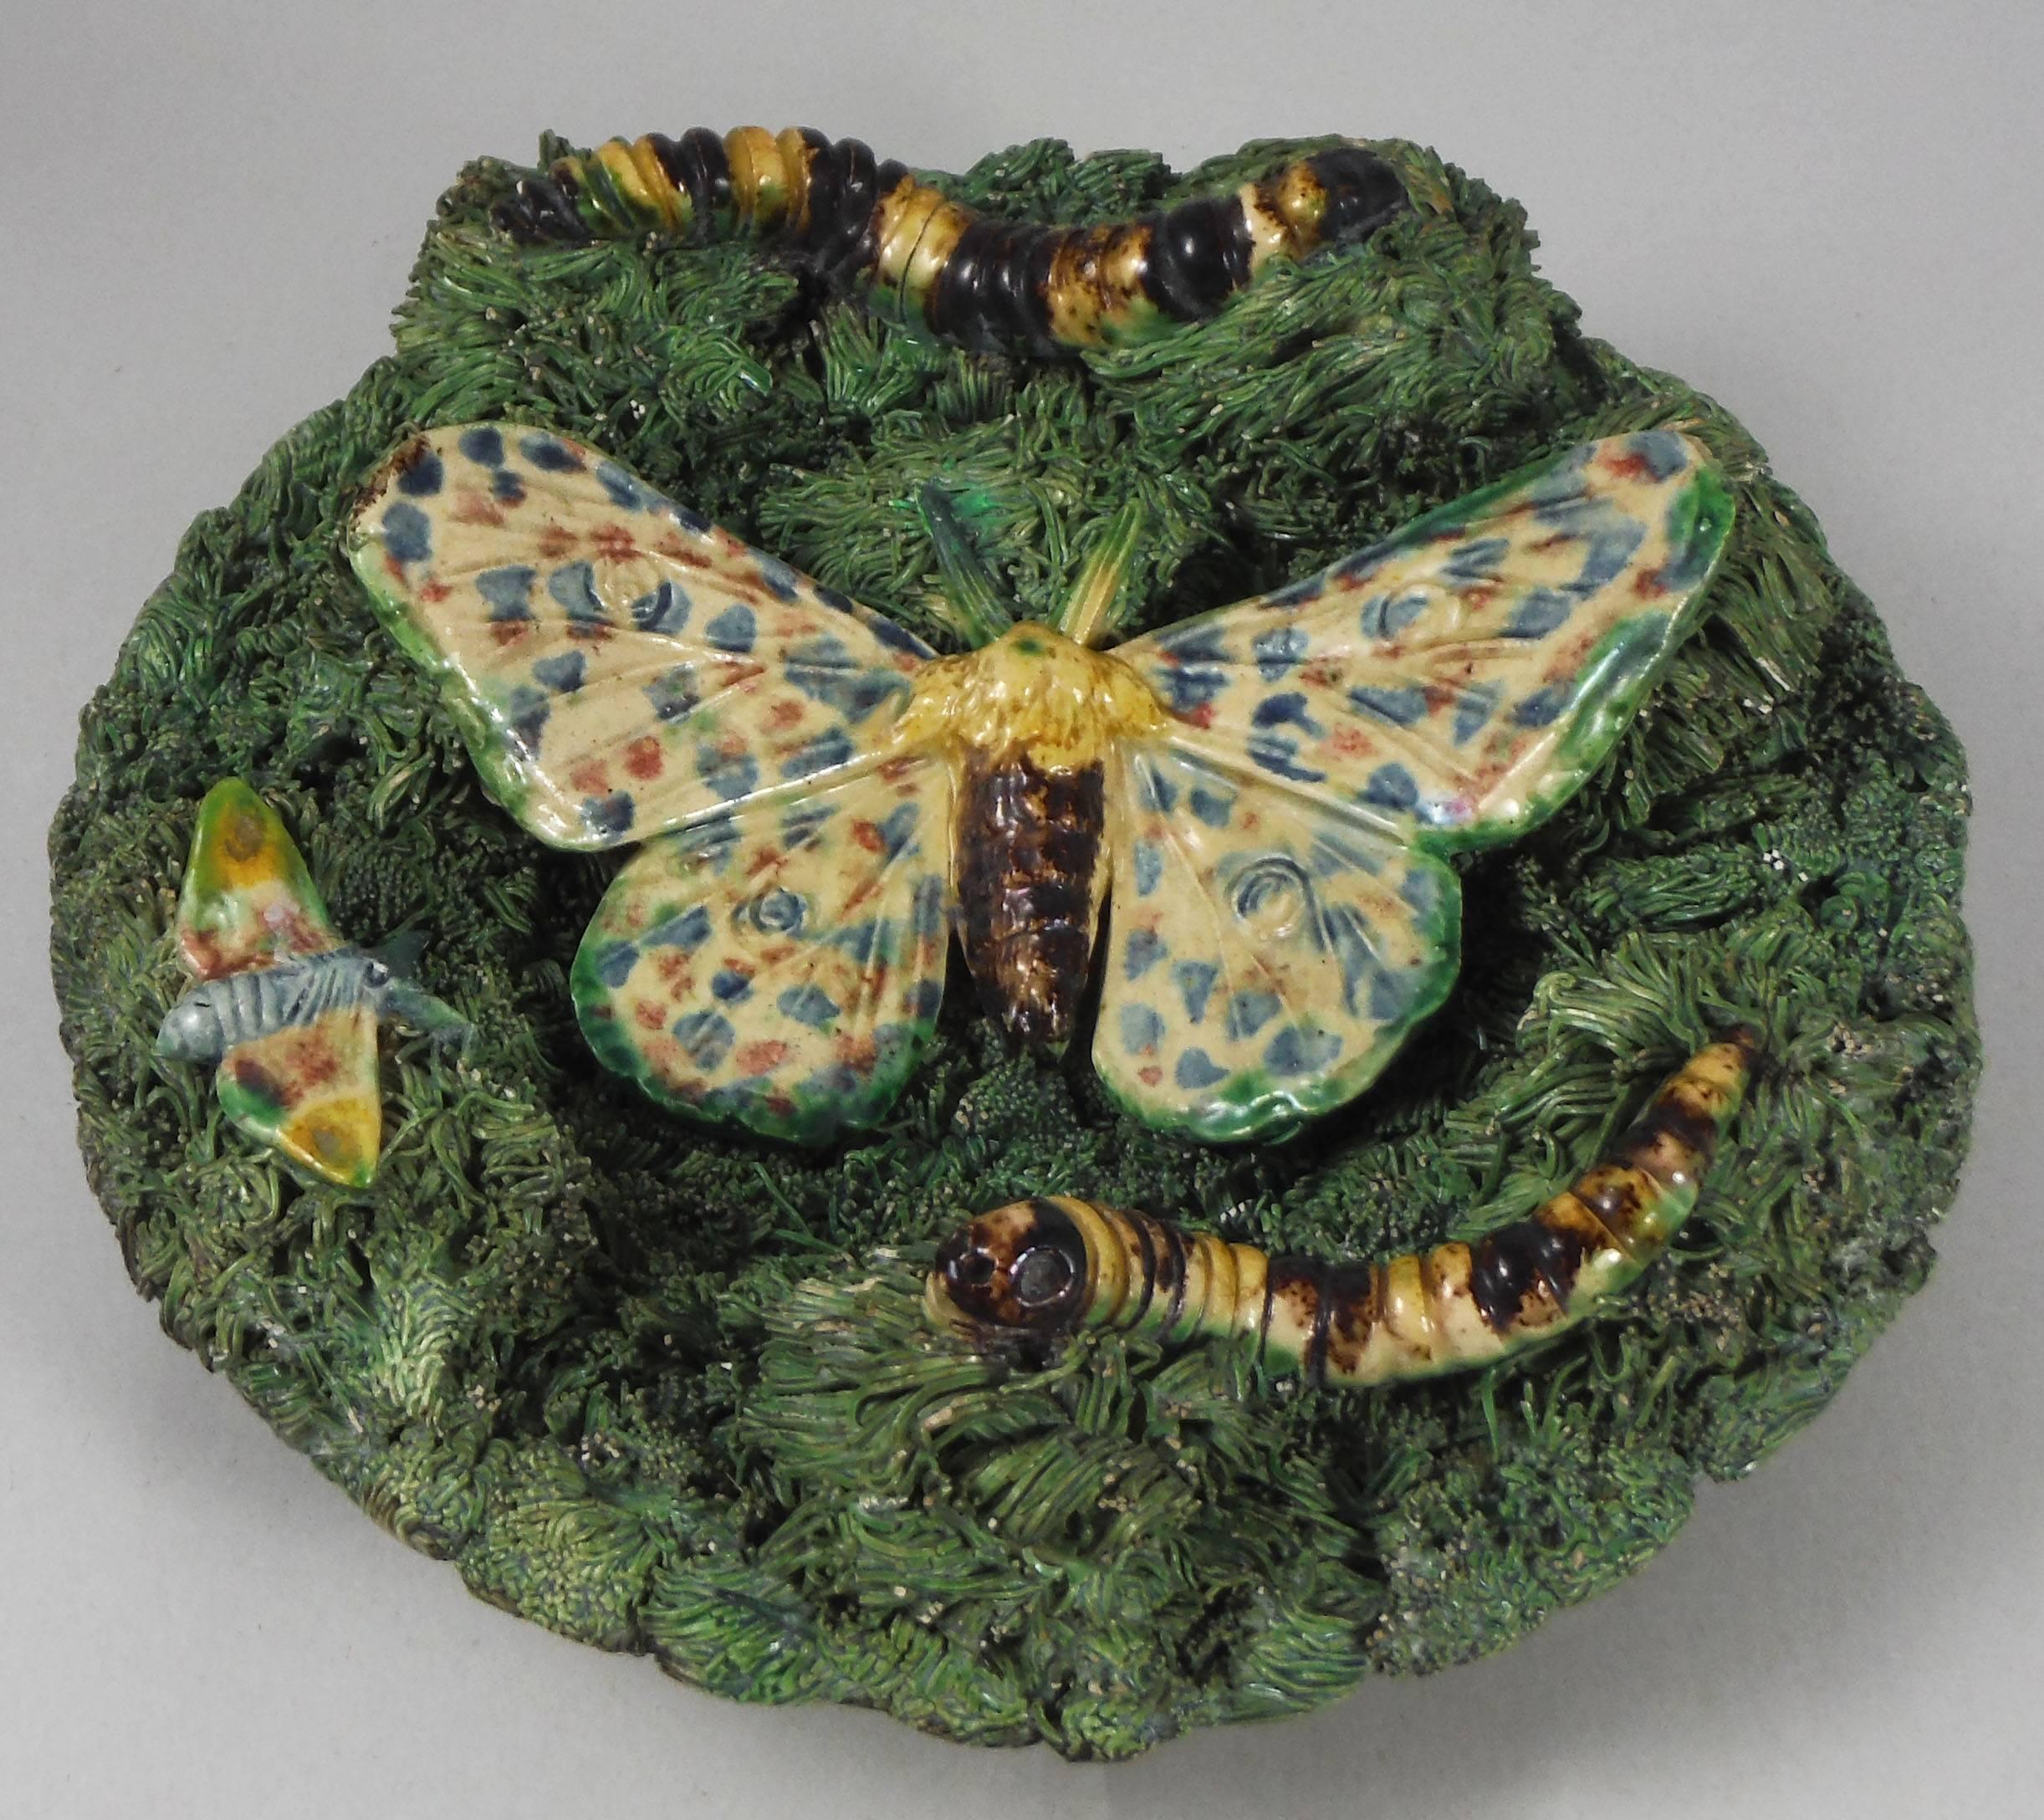 Antique 19th Portuguese Majolica Palissy rare butterfly platter signed José Alves Cunha (Caldas da Rainha).
A similar example is exhibited in the Museum of Art New Orleans.
Reference: Pg.68 